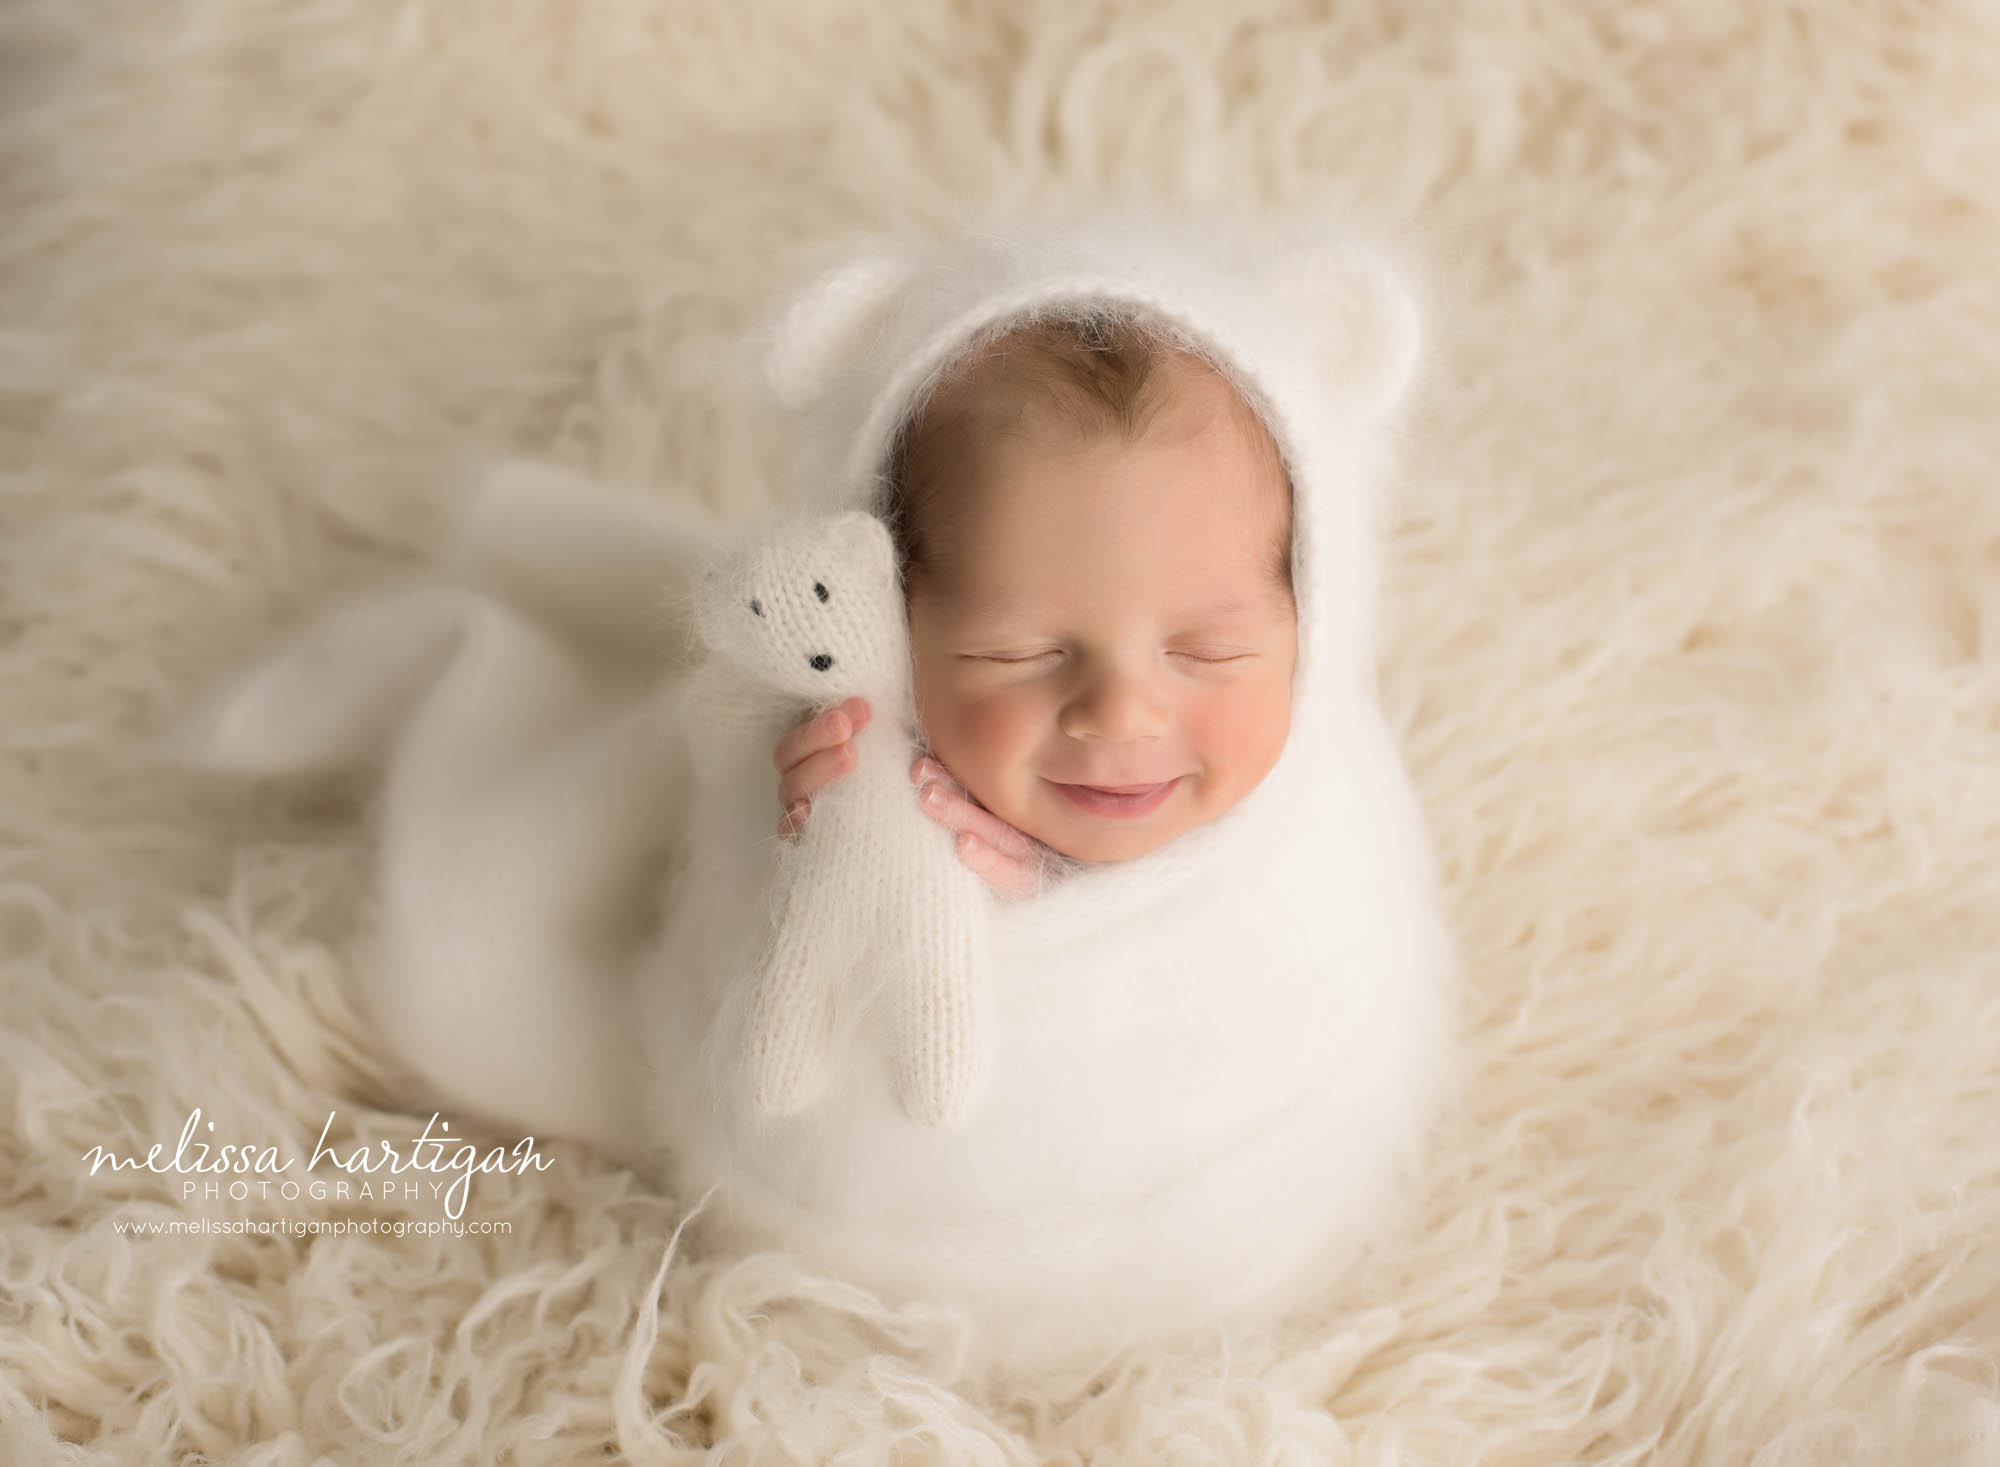 Newborn baby boy smiling in posed newborn photography picture wrapped in white knitted wrap with matching angora bear bonnet and matching teddy